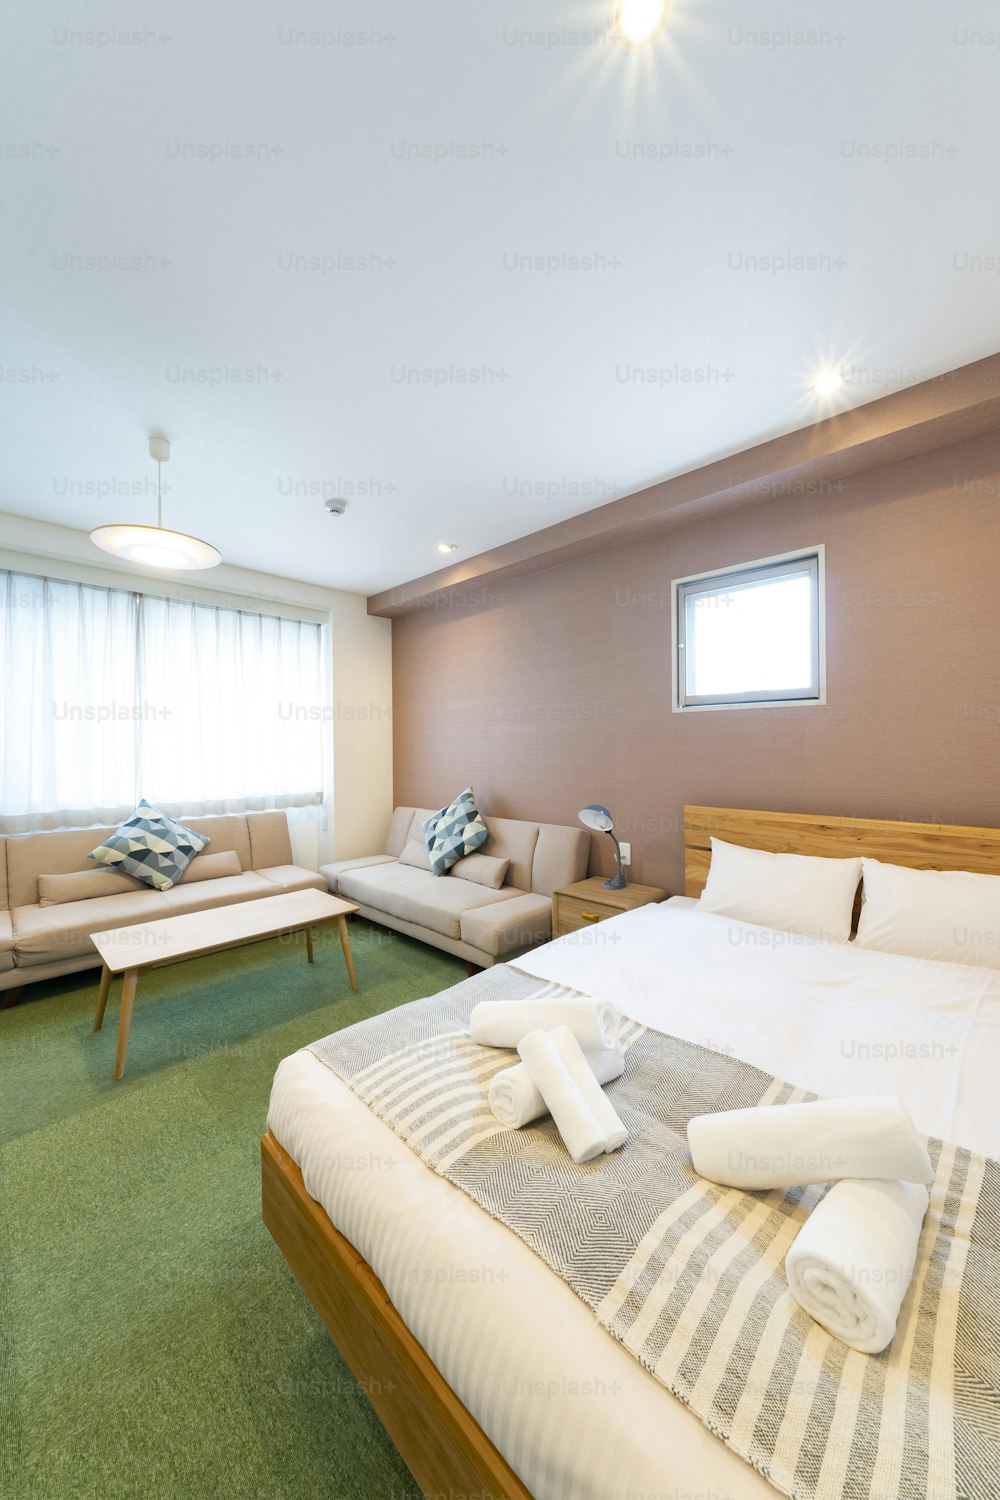 Hotel room with sofa, cushions, table and bed